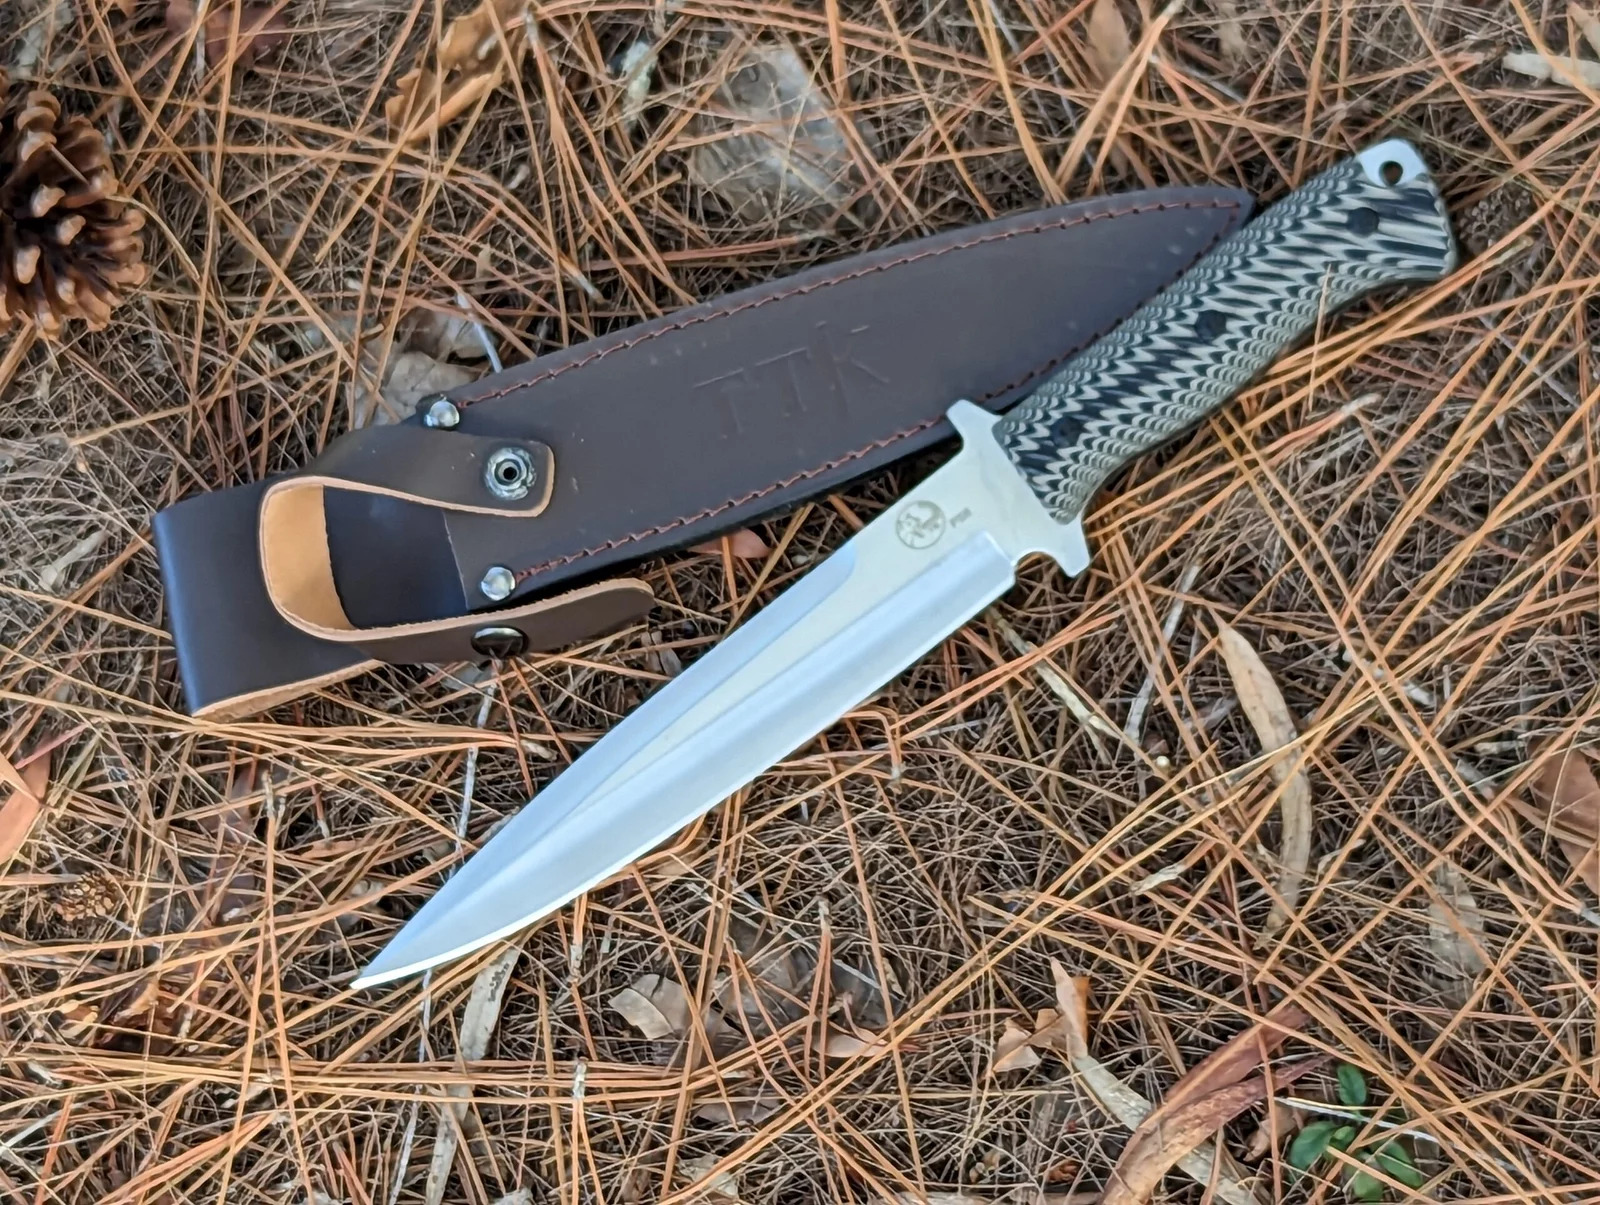 Tassie Tiger Knives Fixed Blade Hunting / Camp Knife with Micarta